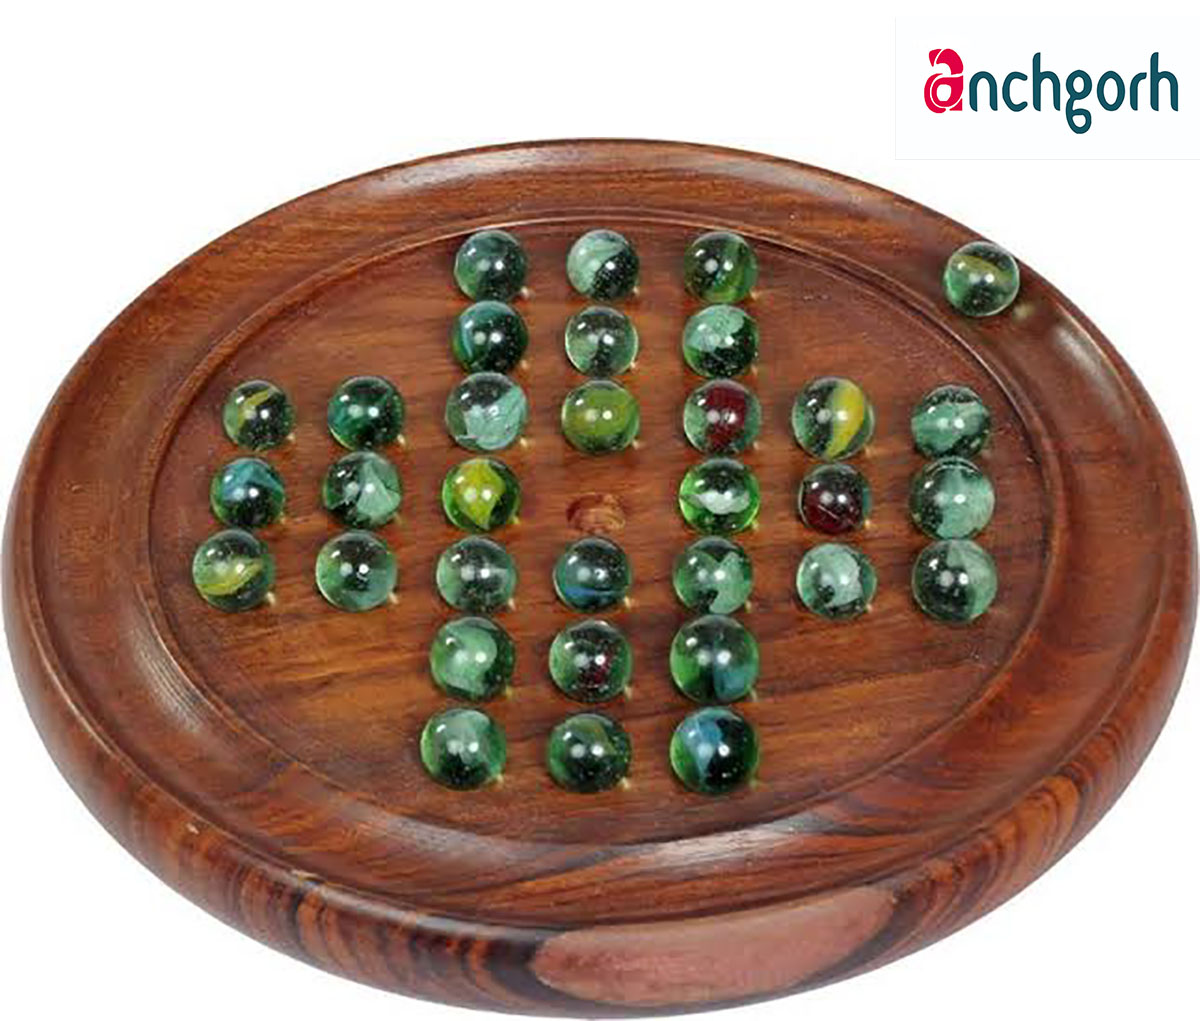 Anchgorh Sheesham Wooden Solitaire Board Games with Glass Marbles for Kids Brain Development from Anchgorh